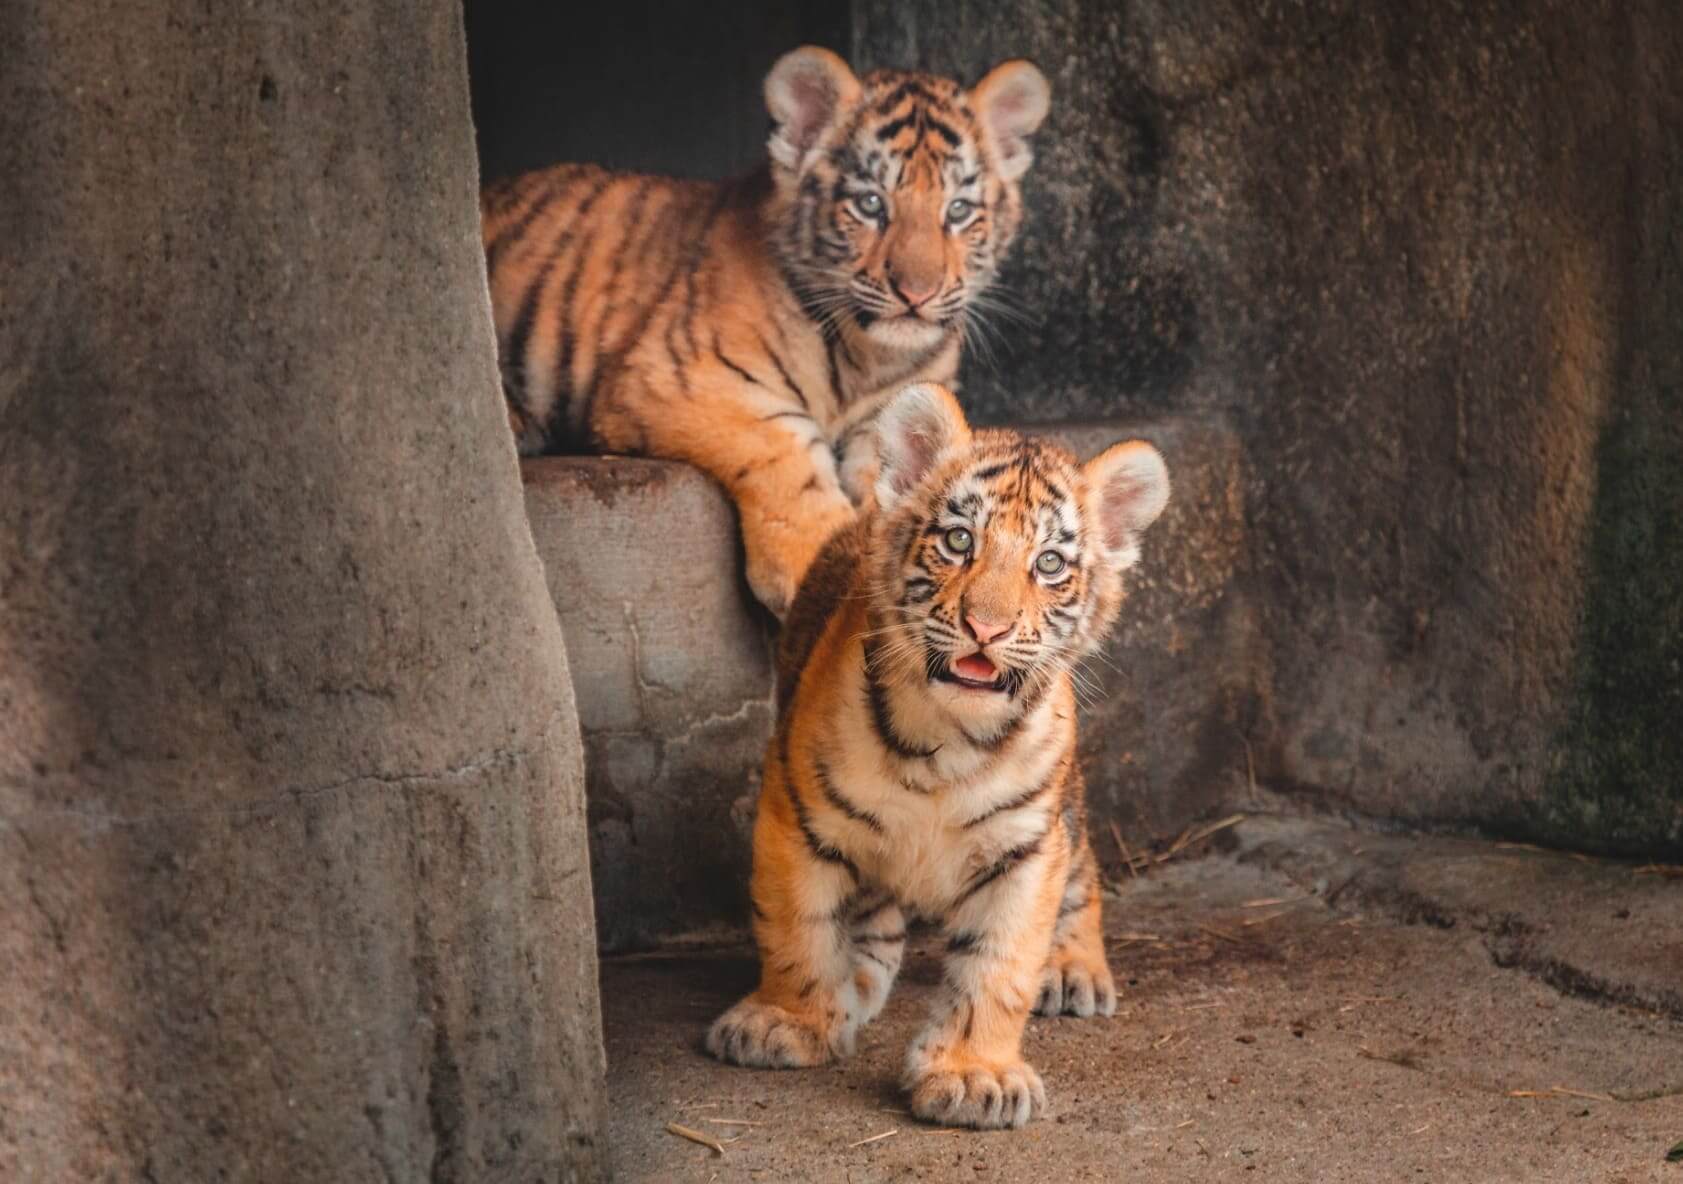 The birth of two tiger cubs Amur